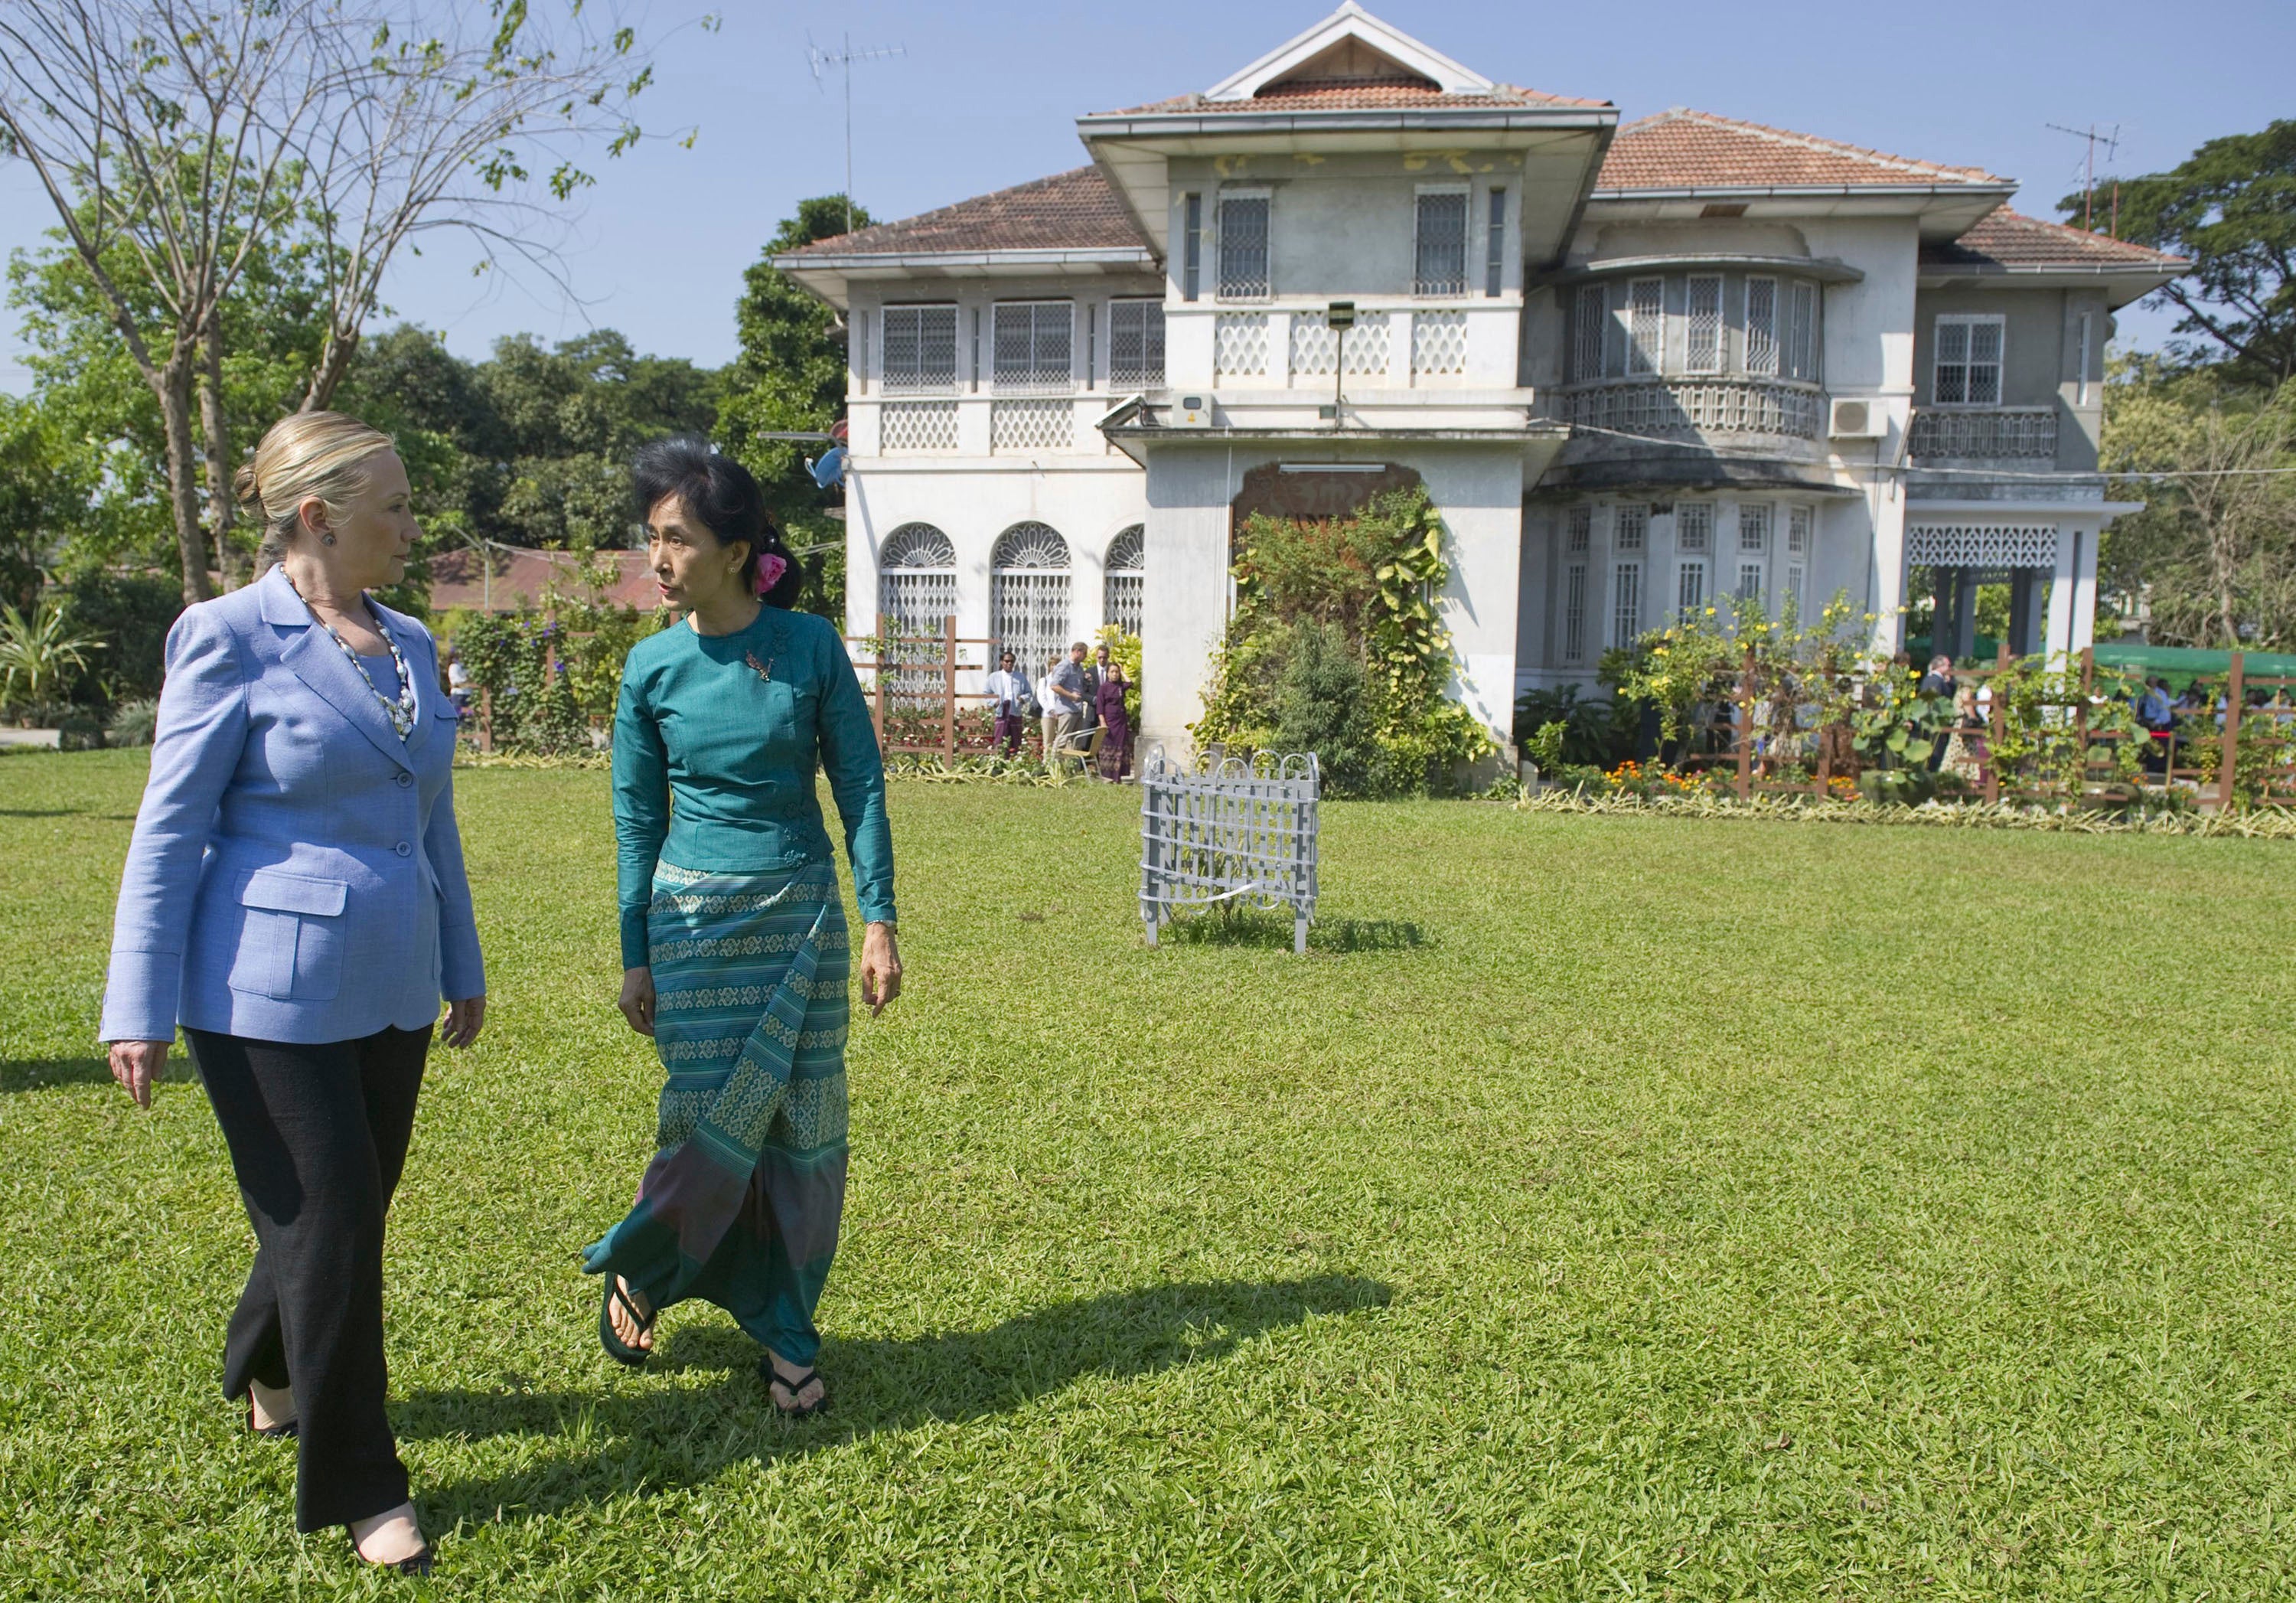 Myanmar’s Aung San Suu Kyi is seen in this 2011 image at her home in Yangon with Hillary Clinton